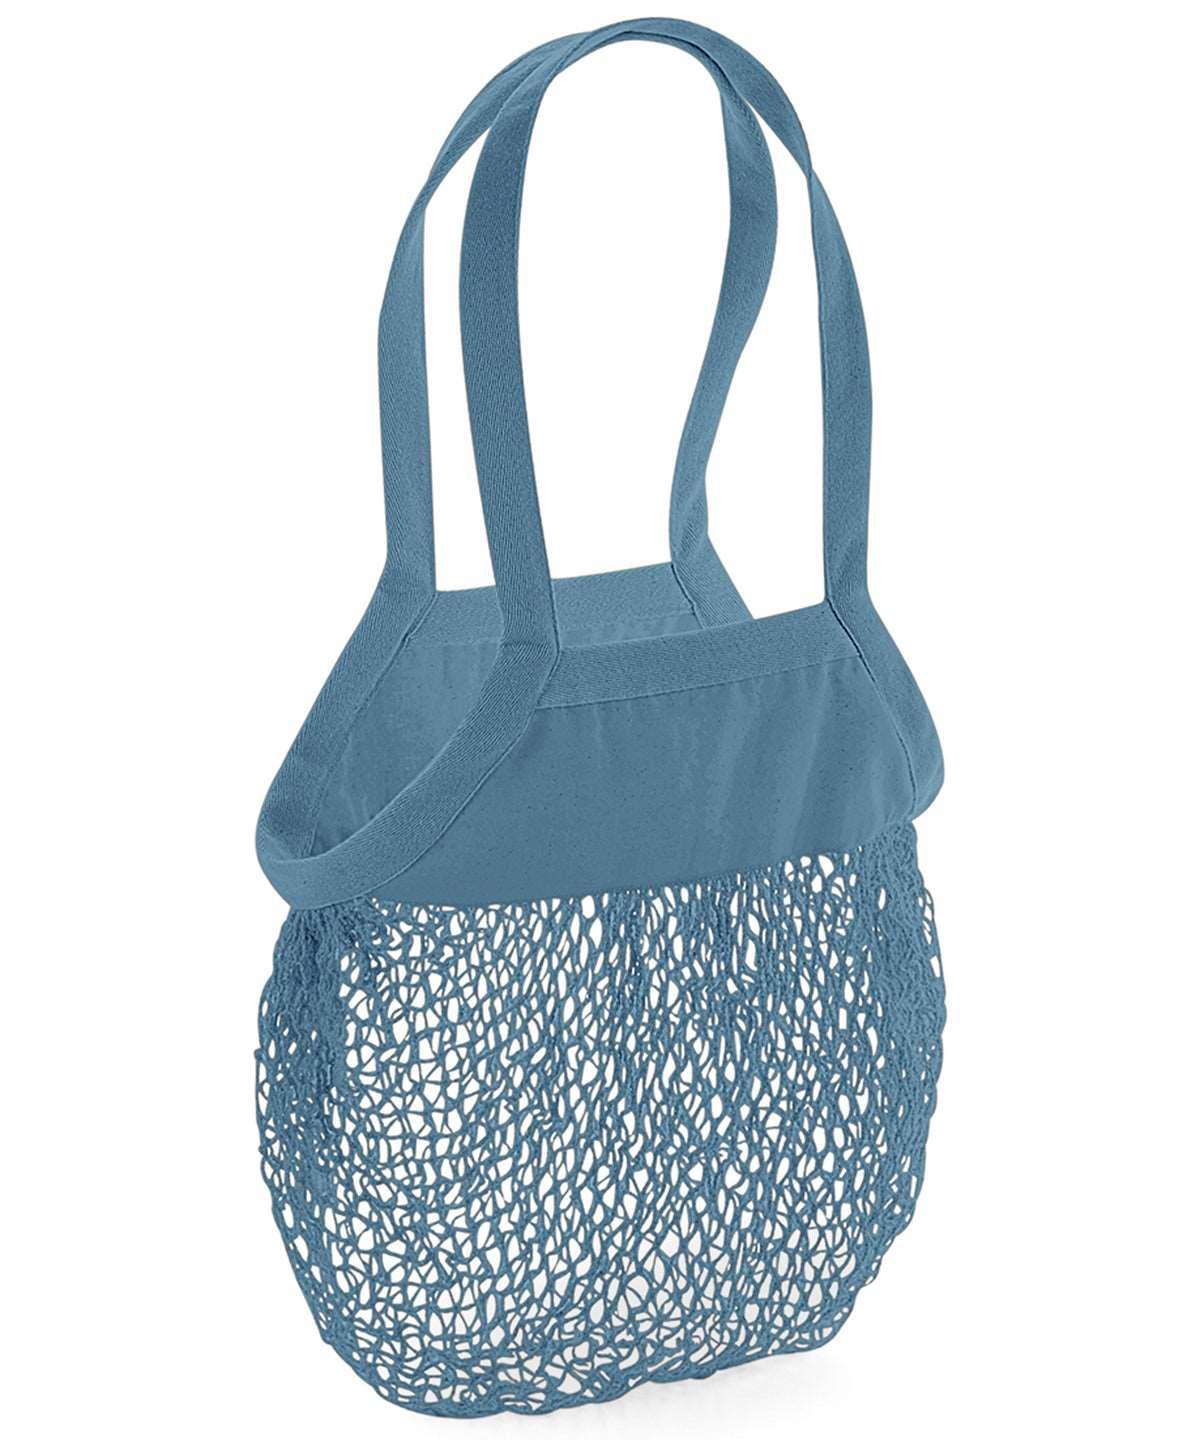 Airforce Blue - Organic cotton mesh grocery bag Bags Westford Mill Bags & Luggage, New Colours For 2022, Organic & Conscious, Rebrandable Schoolwear Centres